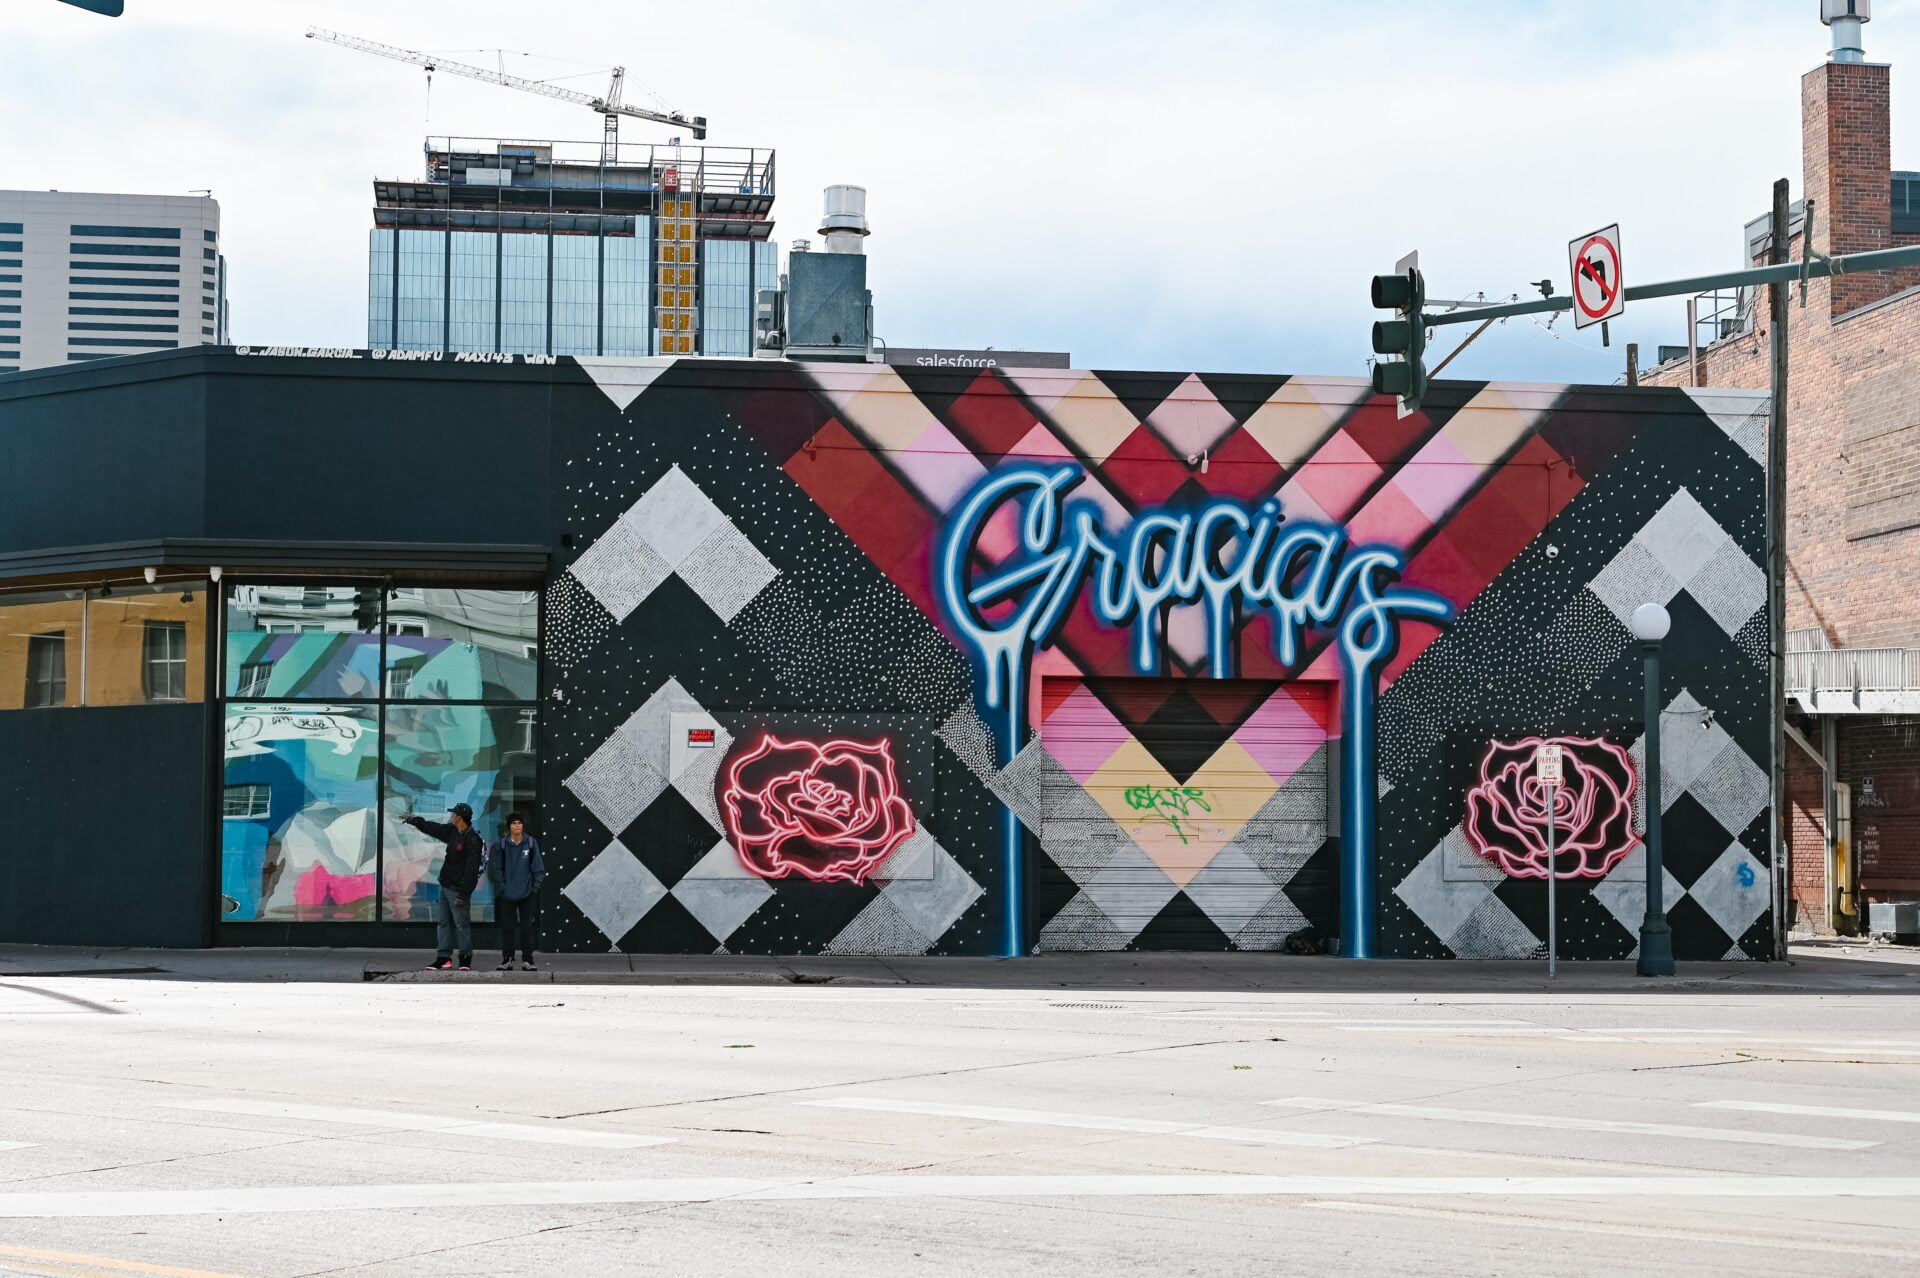 large mural with the word Gracias, two large roses and a square pattern in the background